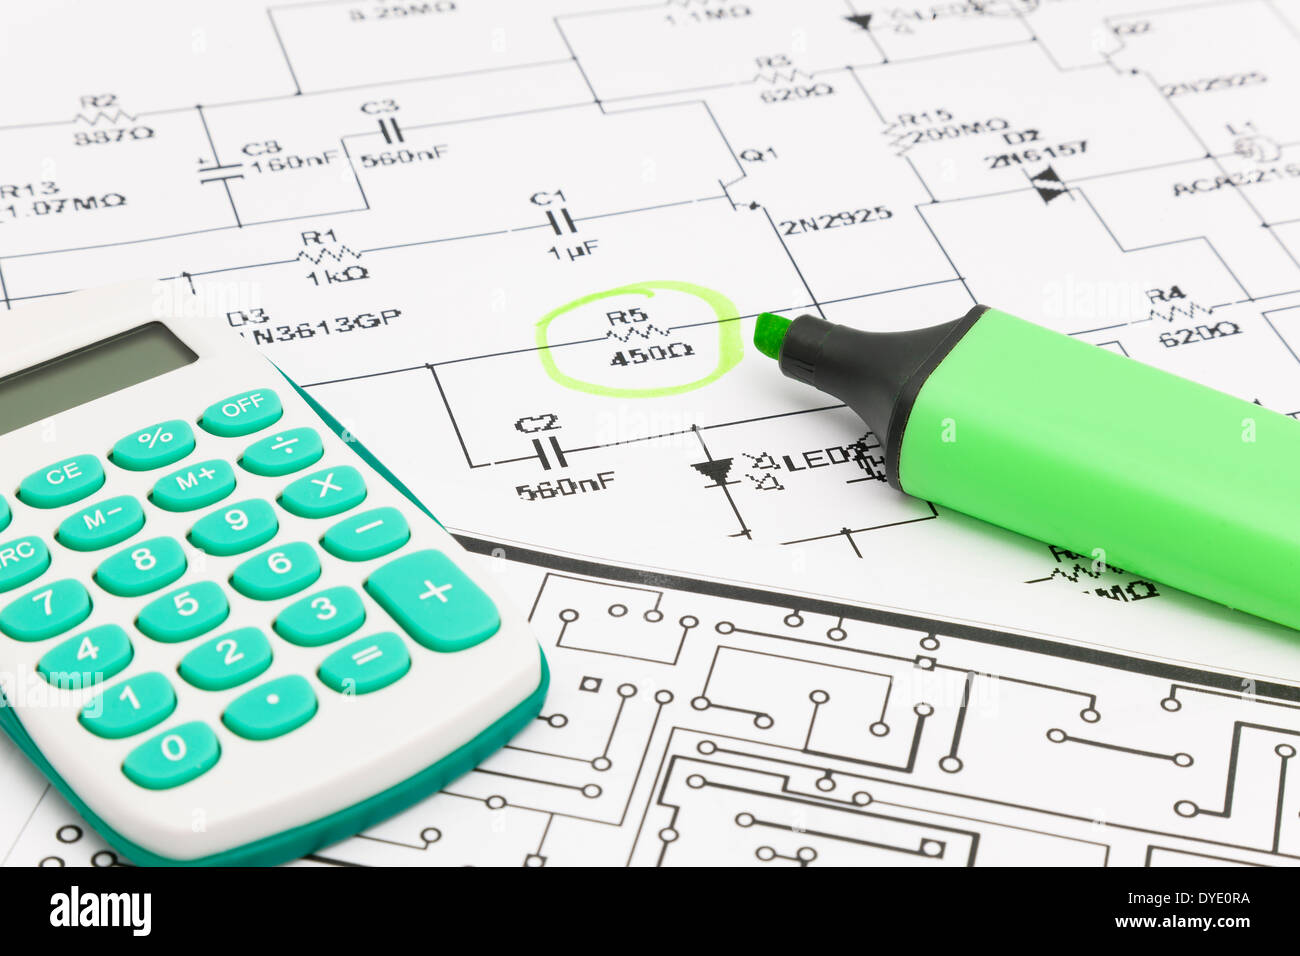 Design of electronic project Stock Photo